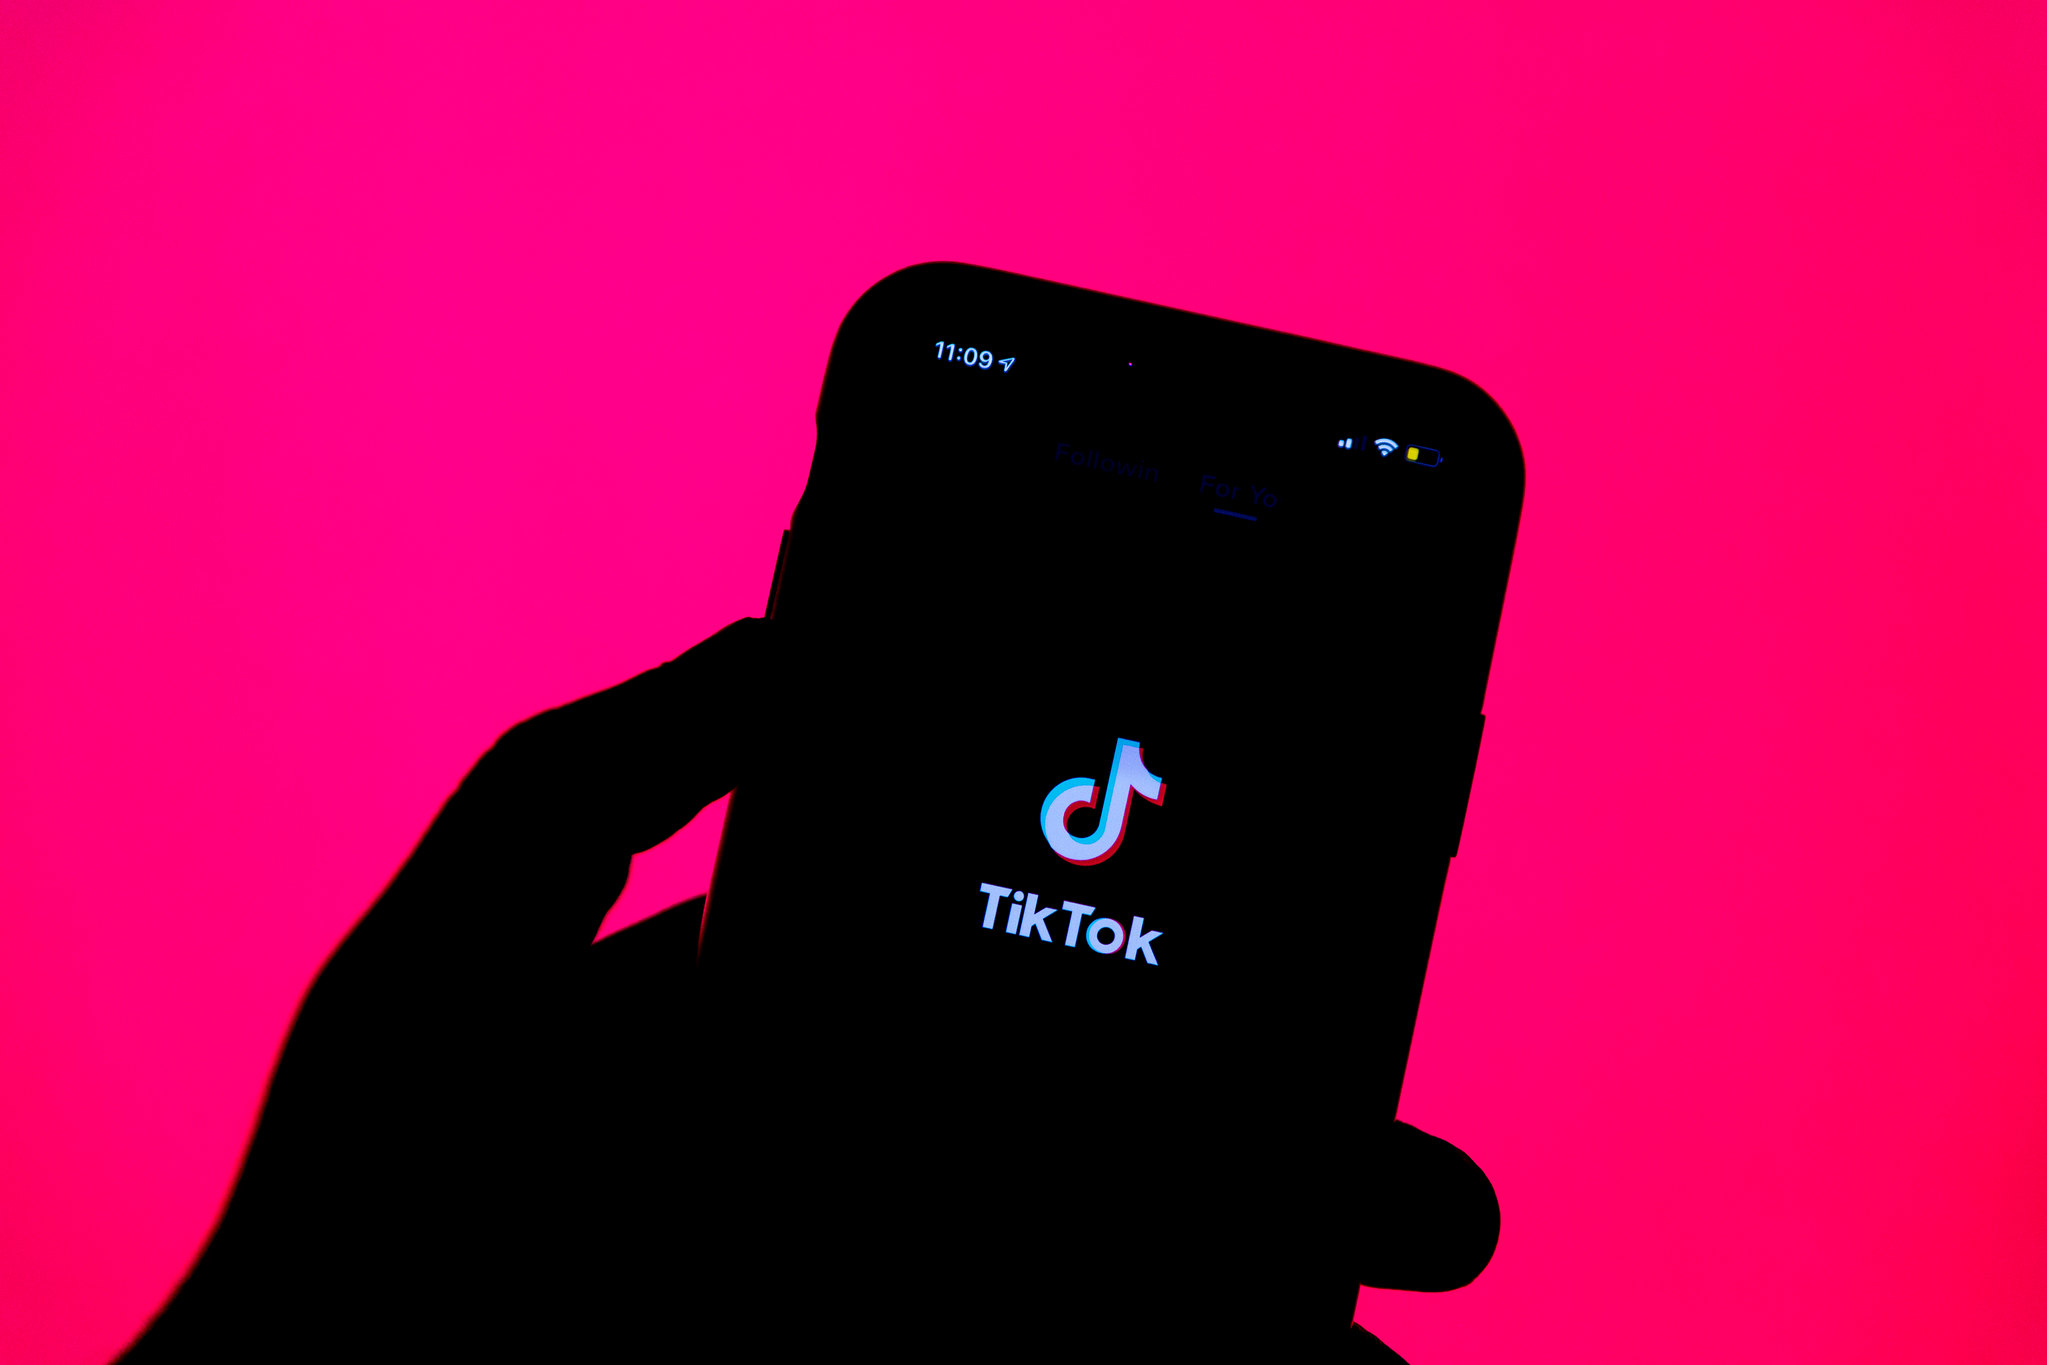 The silhouette of a hand holds an iPhone up against a bright, pink background. The phone displays the TikTok logo.